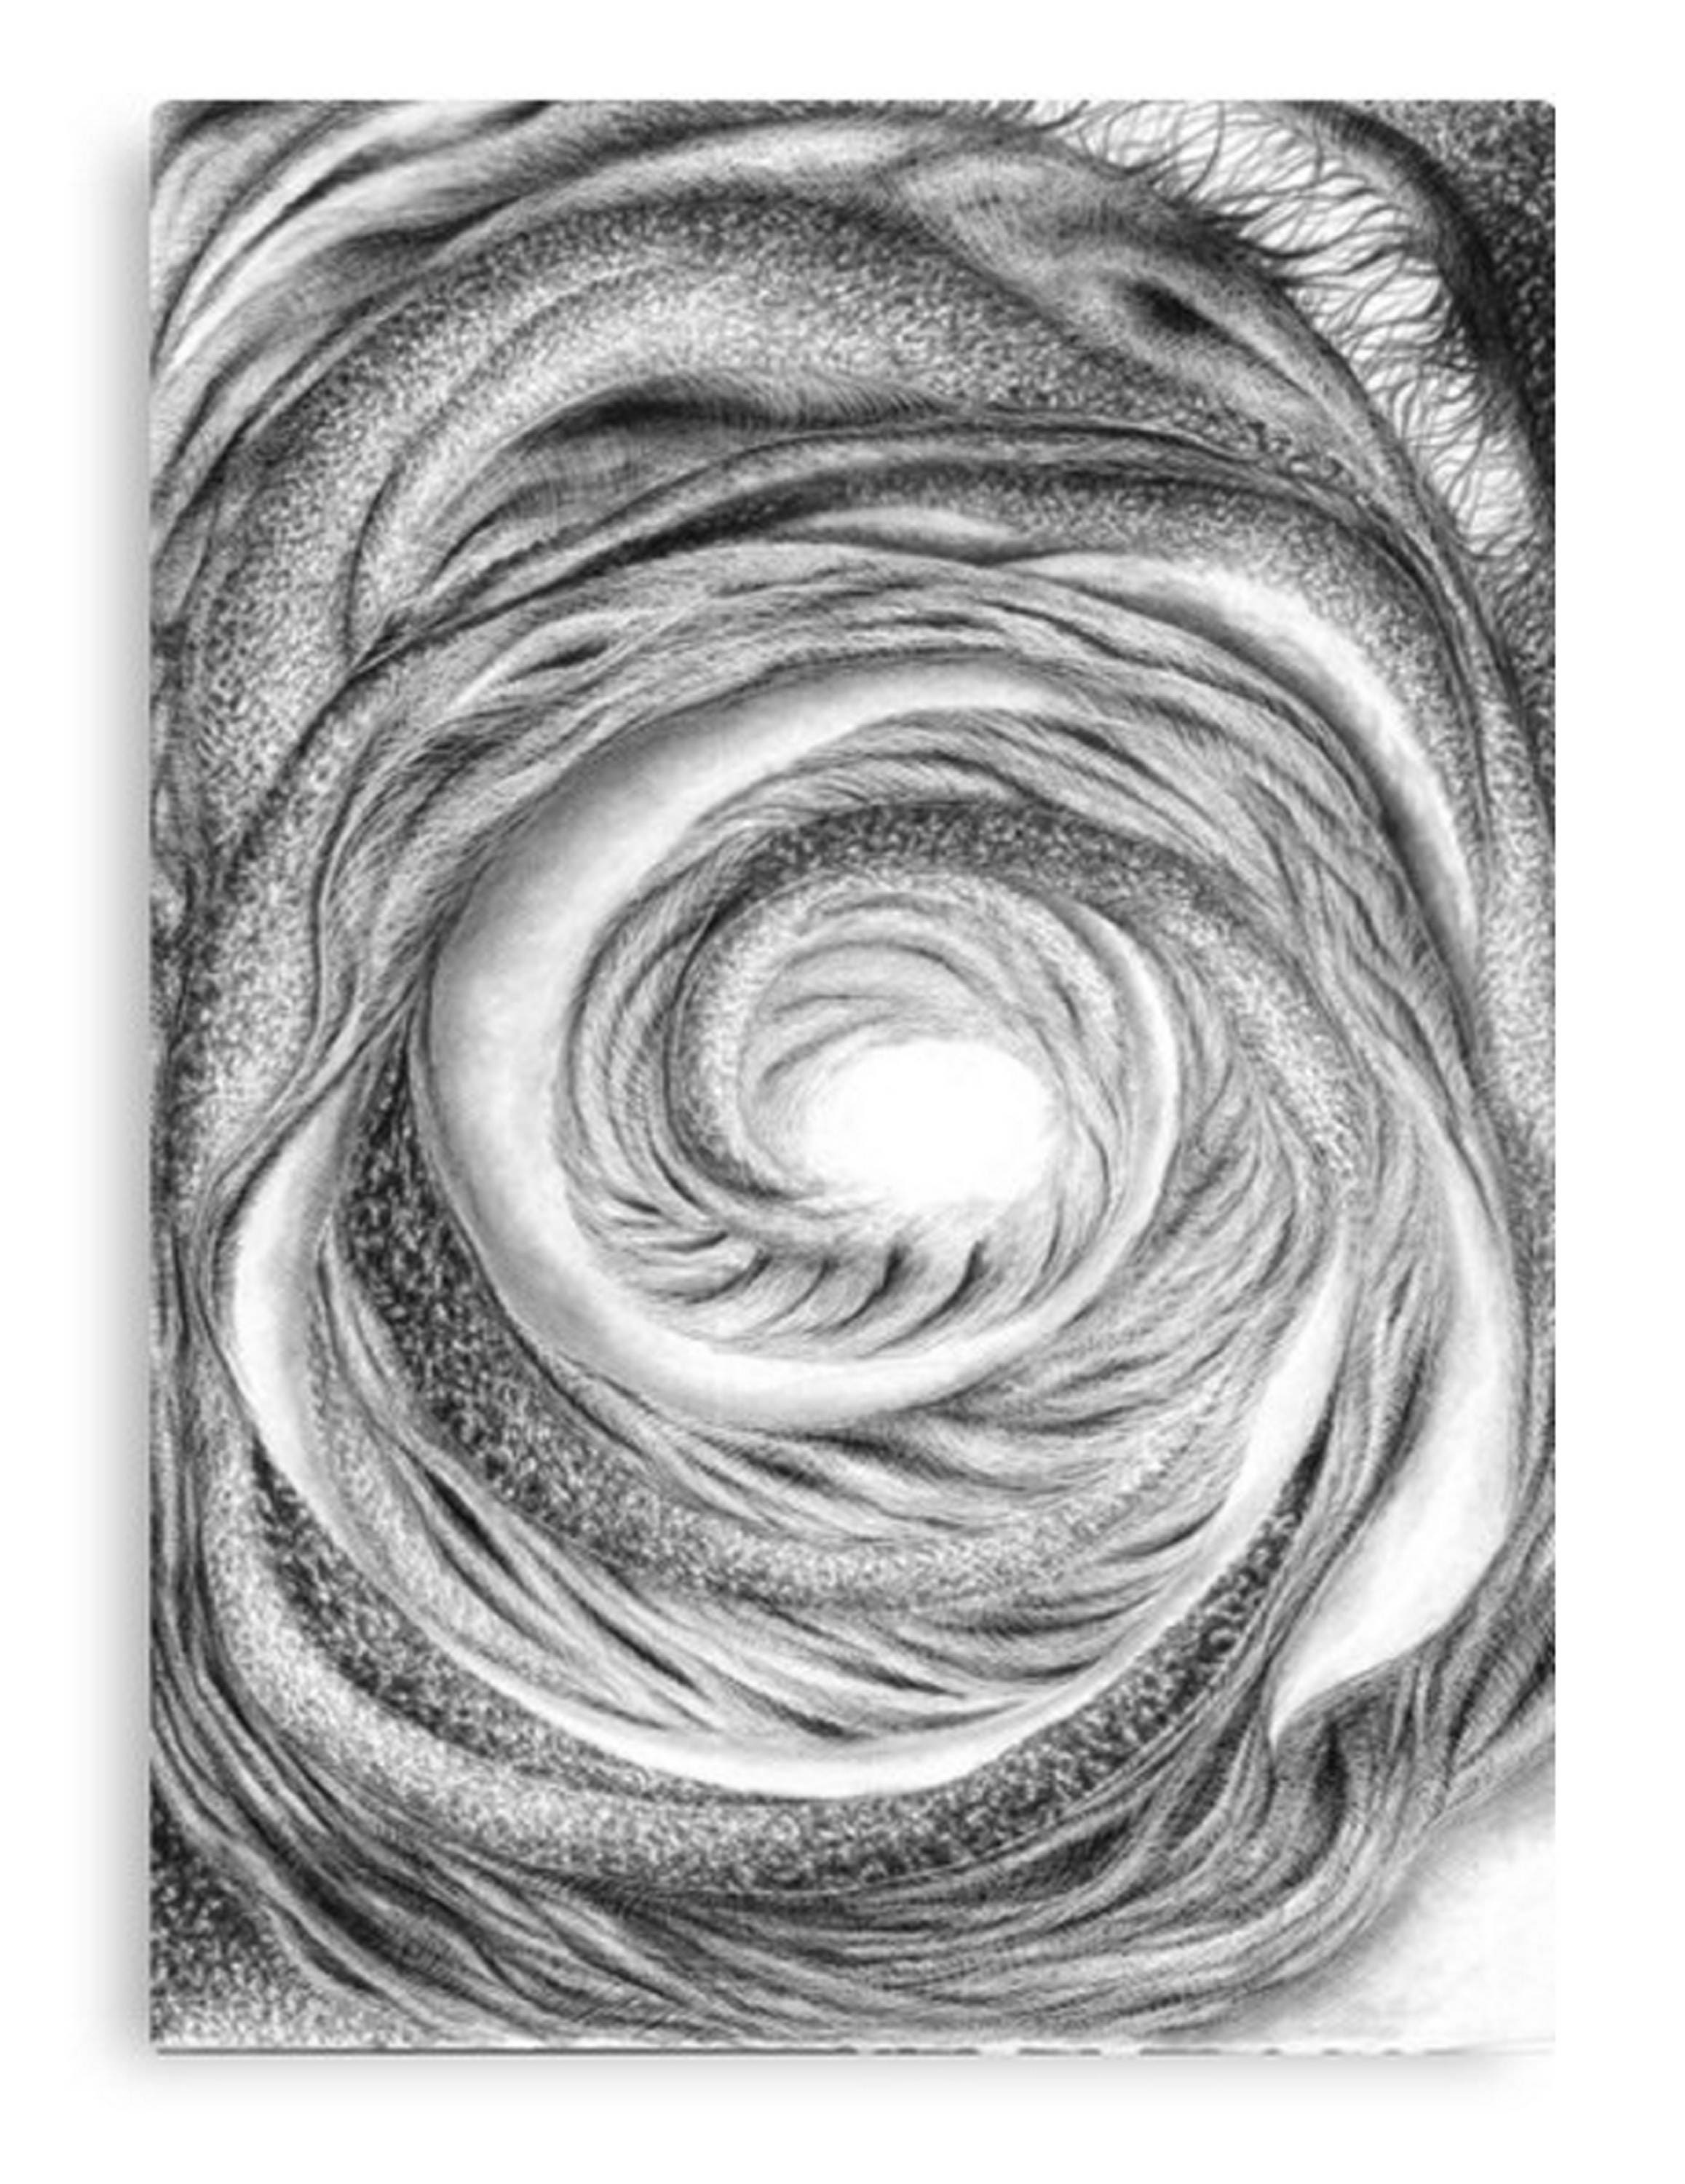 Abstract Pencil Drawings on Pinterest